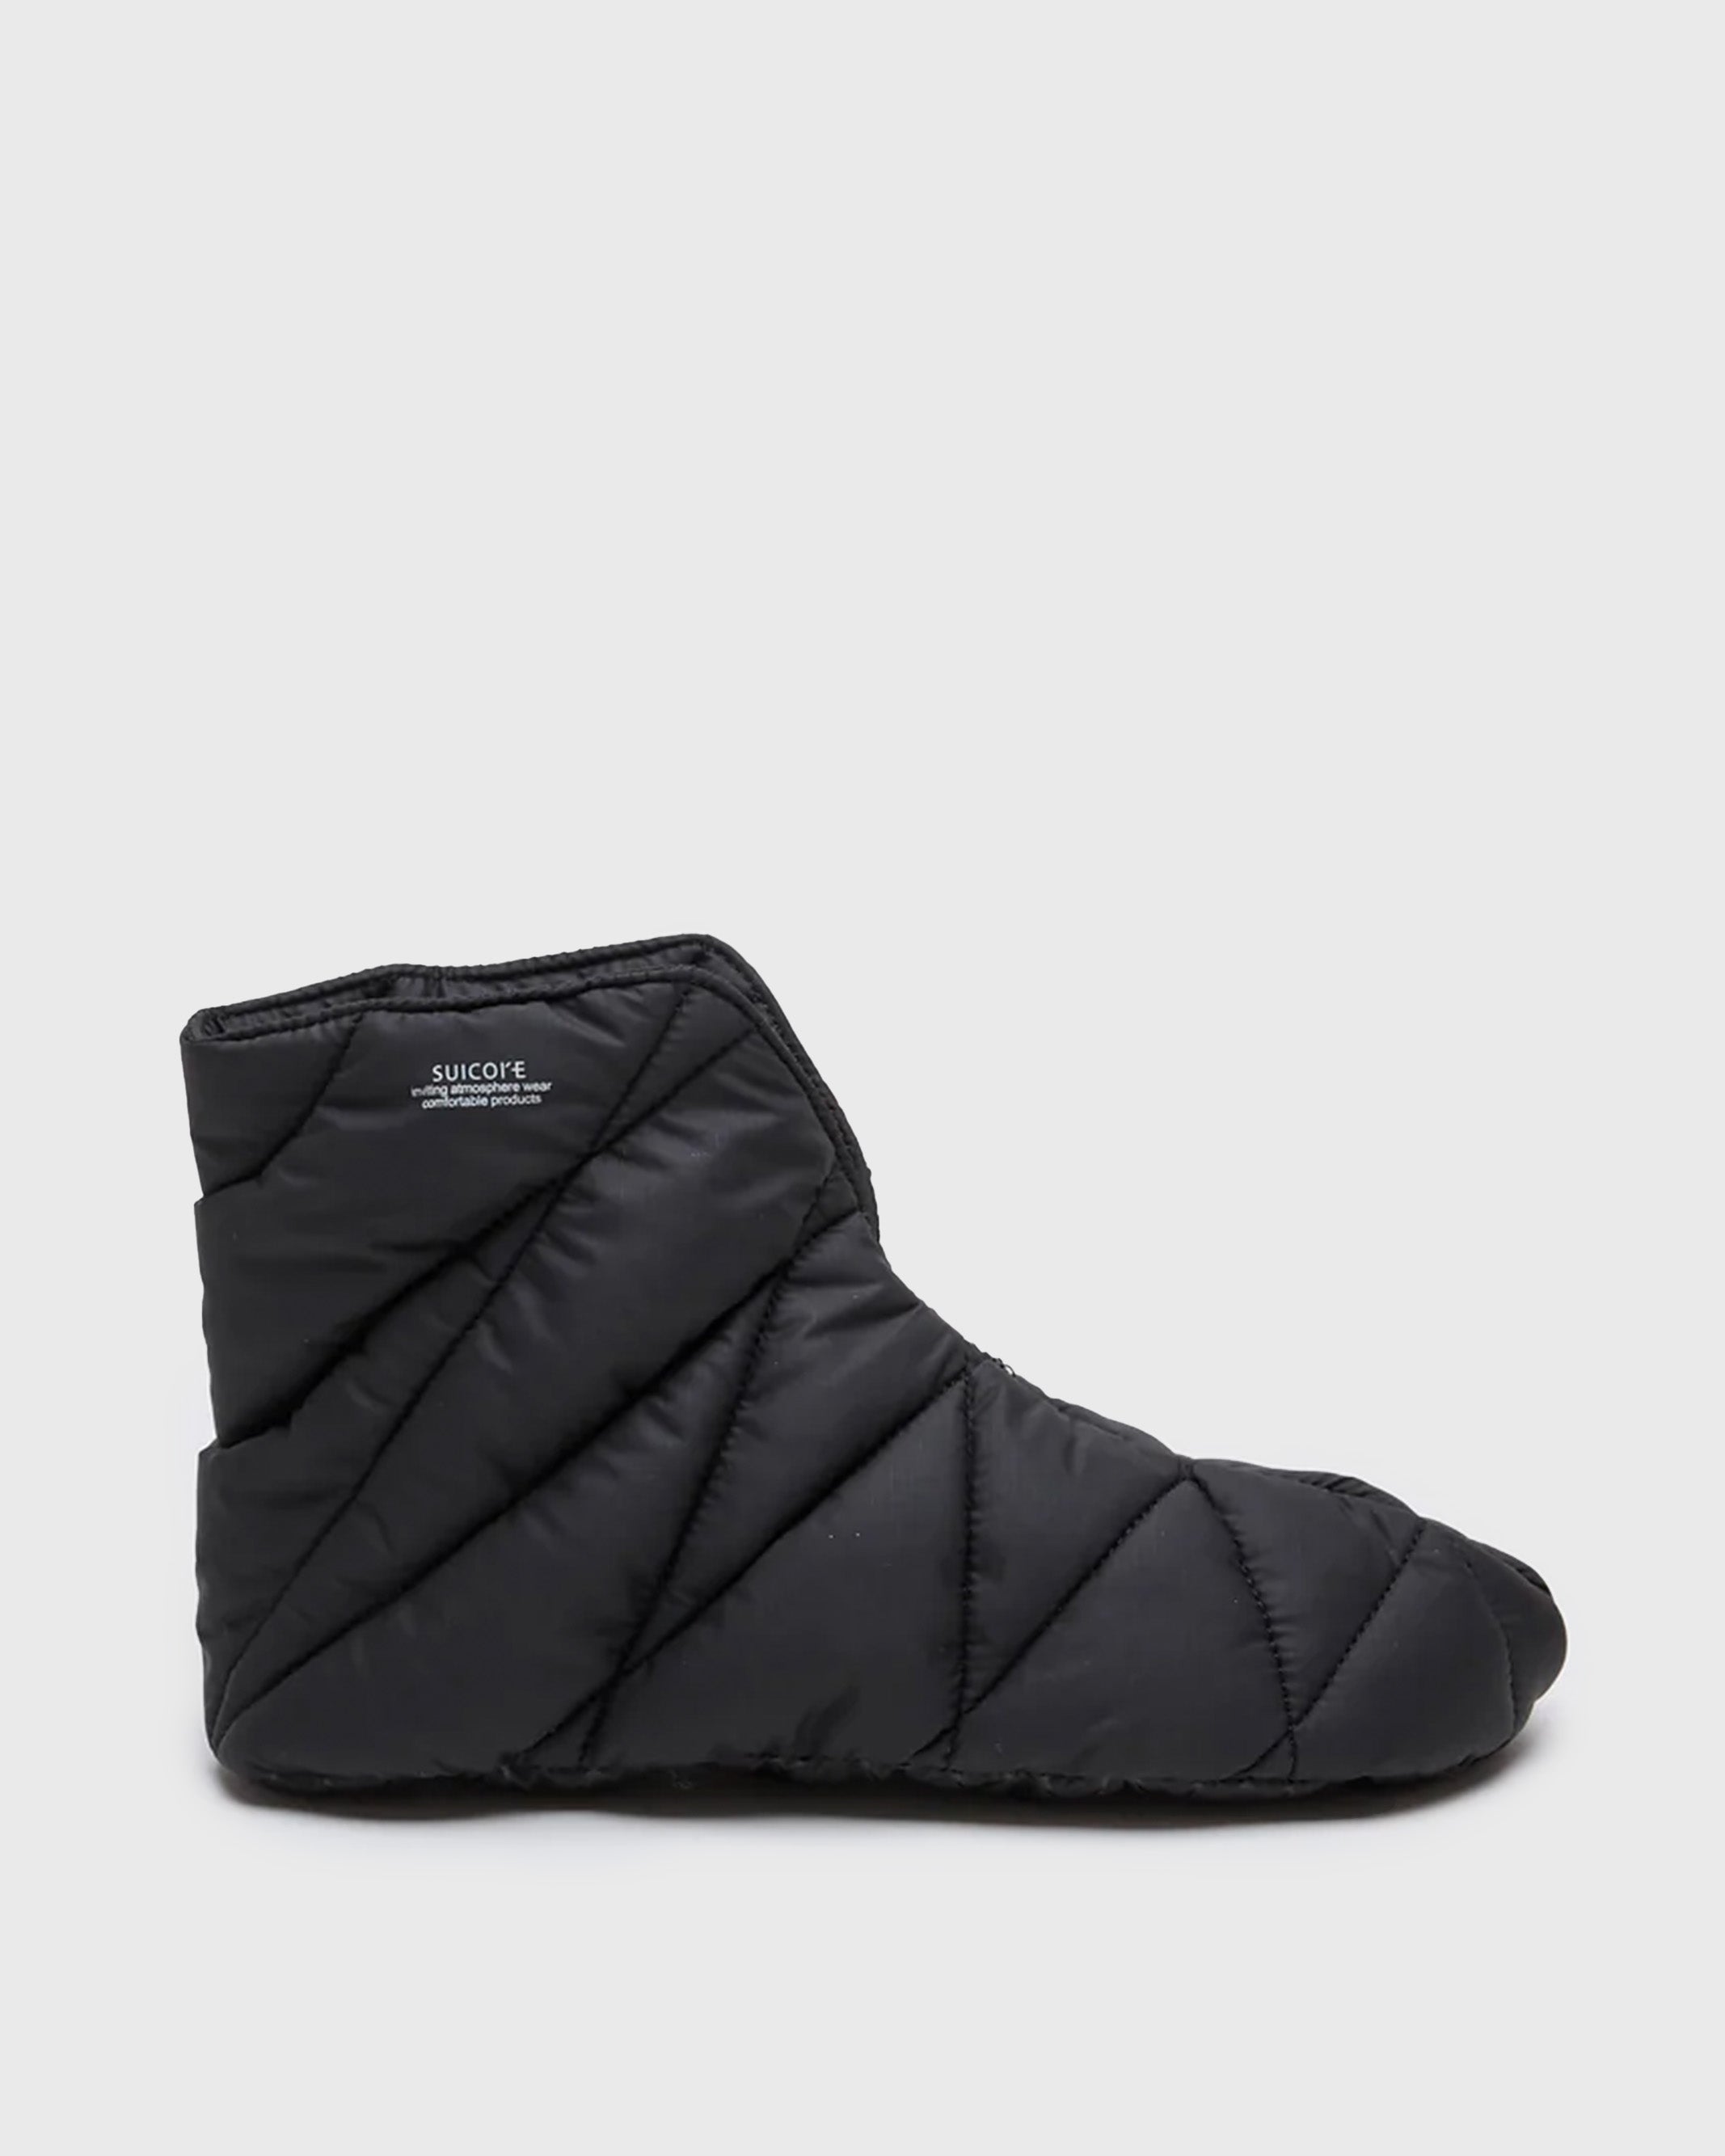 SUICOKE P-SOCK in Black OG-325 | Shop from eightywingold an official brand partner for SUICOKE Canada and US.